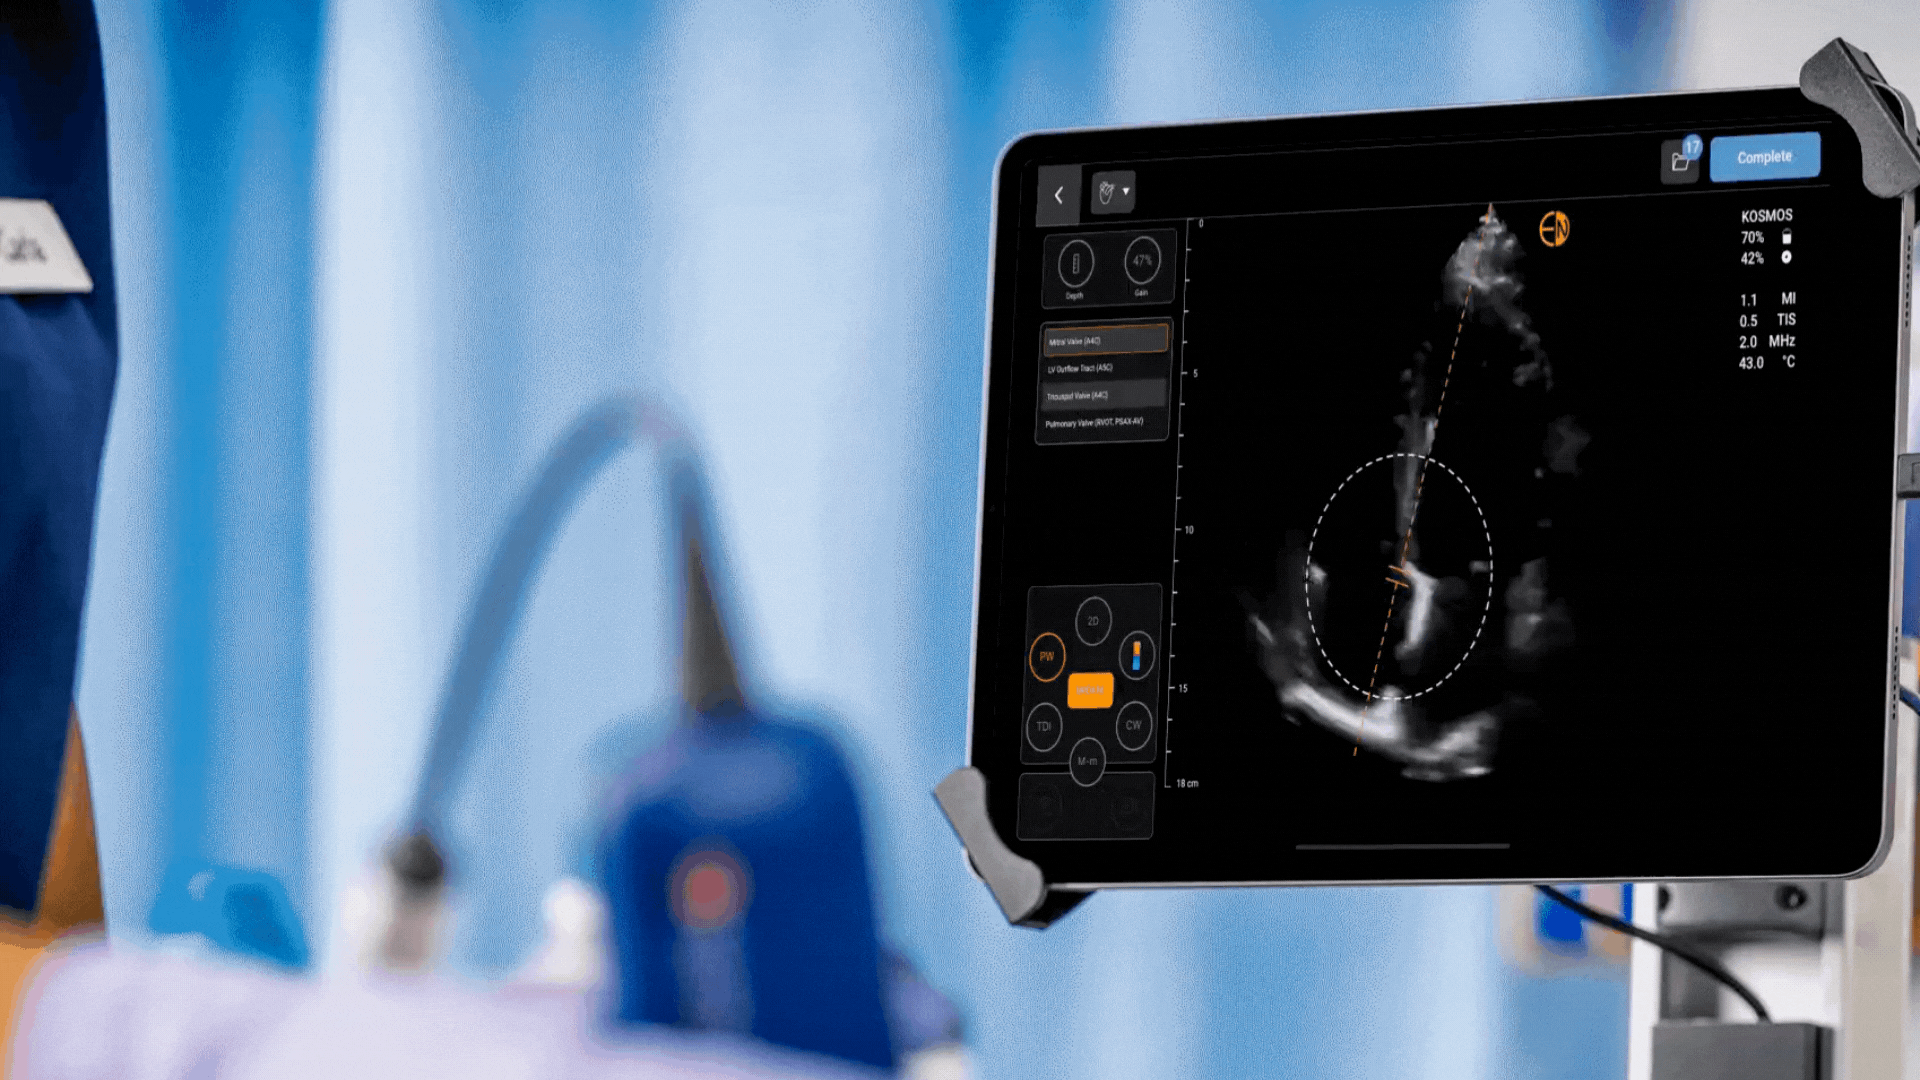 Auto Doppler automatically places the sample gate in the optimal location for the cardiac valve of interest, drastically simplifying valve interrogation for POCUS users.